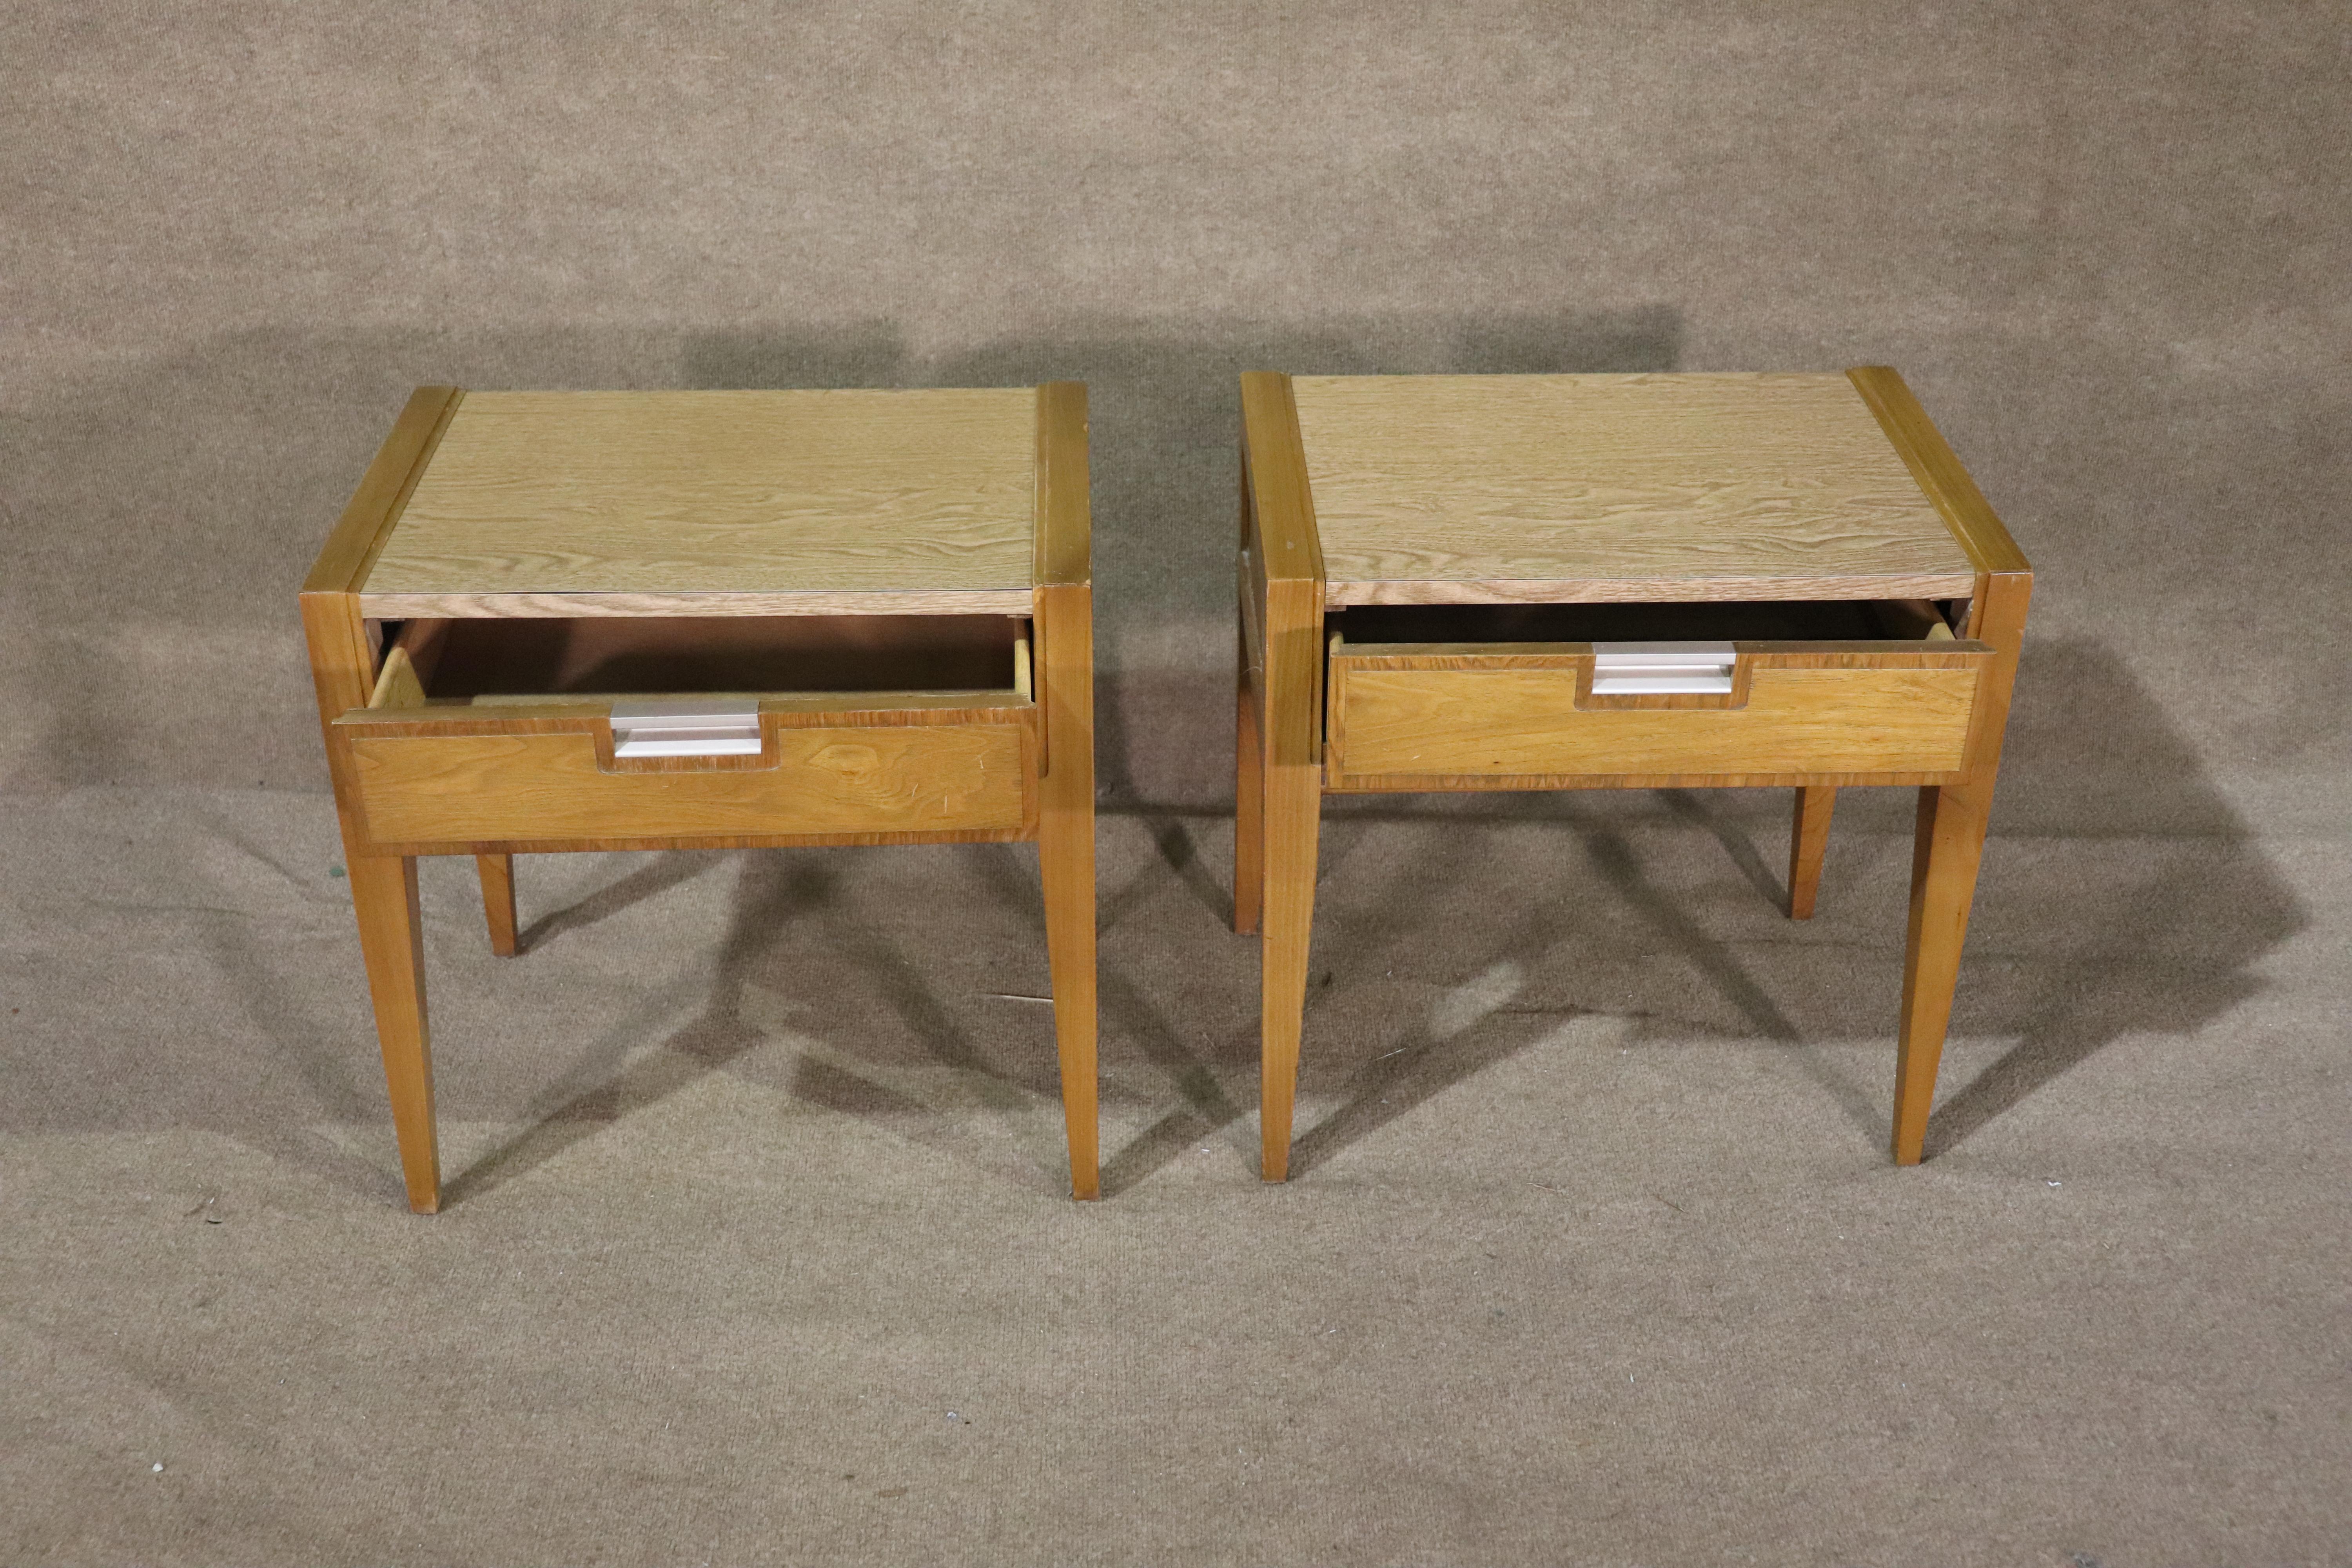 Pair of mid-century modern end tables made by Basic Witz. Made of walnut with laminate tops. Great for use with no worries of water damage. Fine attention to detail with fine trim around the drawers.
Please confirm location NY or NJ